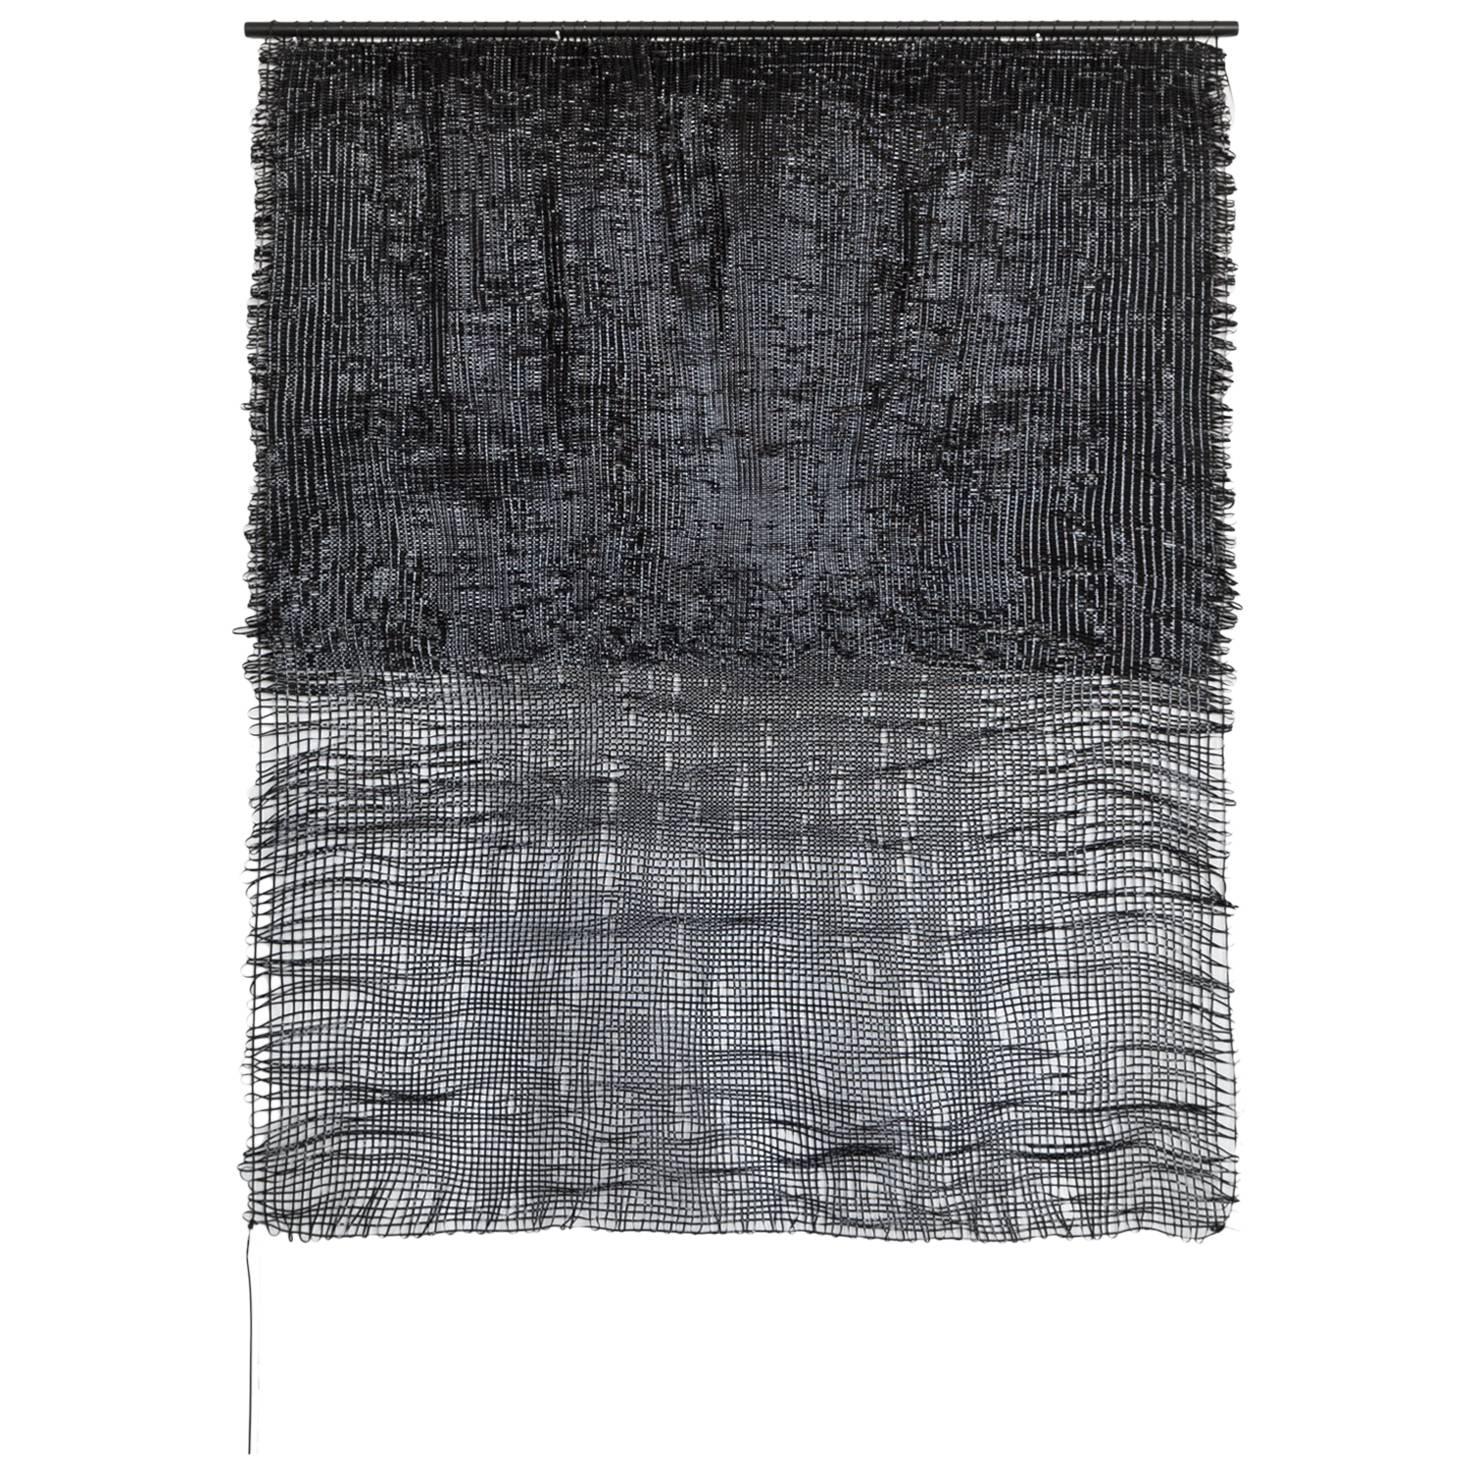 Contemporary Weaving Textile Fiber Art on Rod, Black to Black by Mimi Jung For Sale